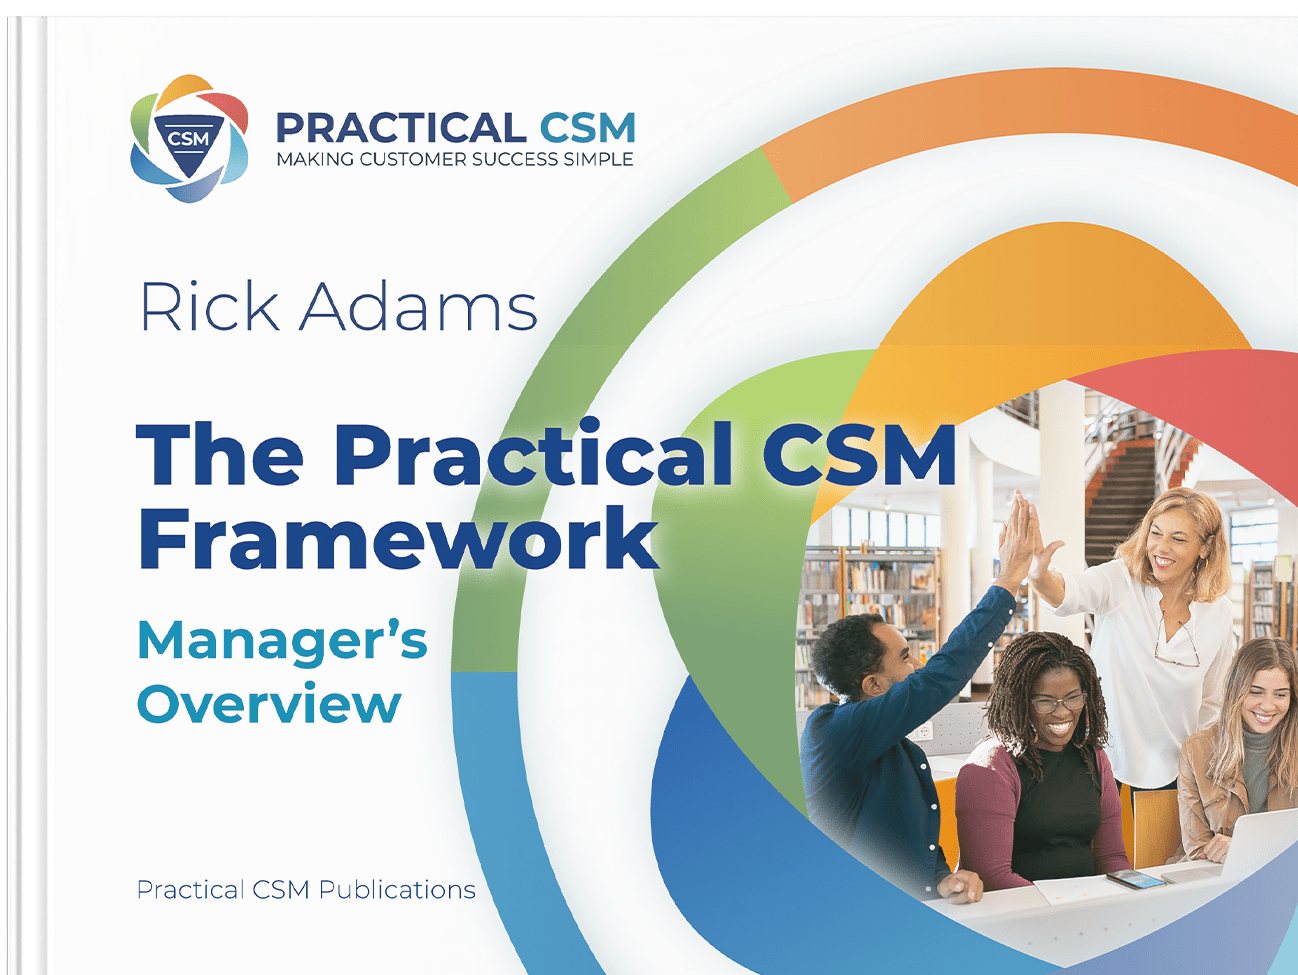 The Practical CSM Framework: Manager’s Overview